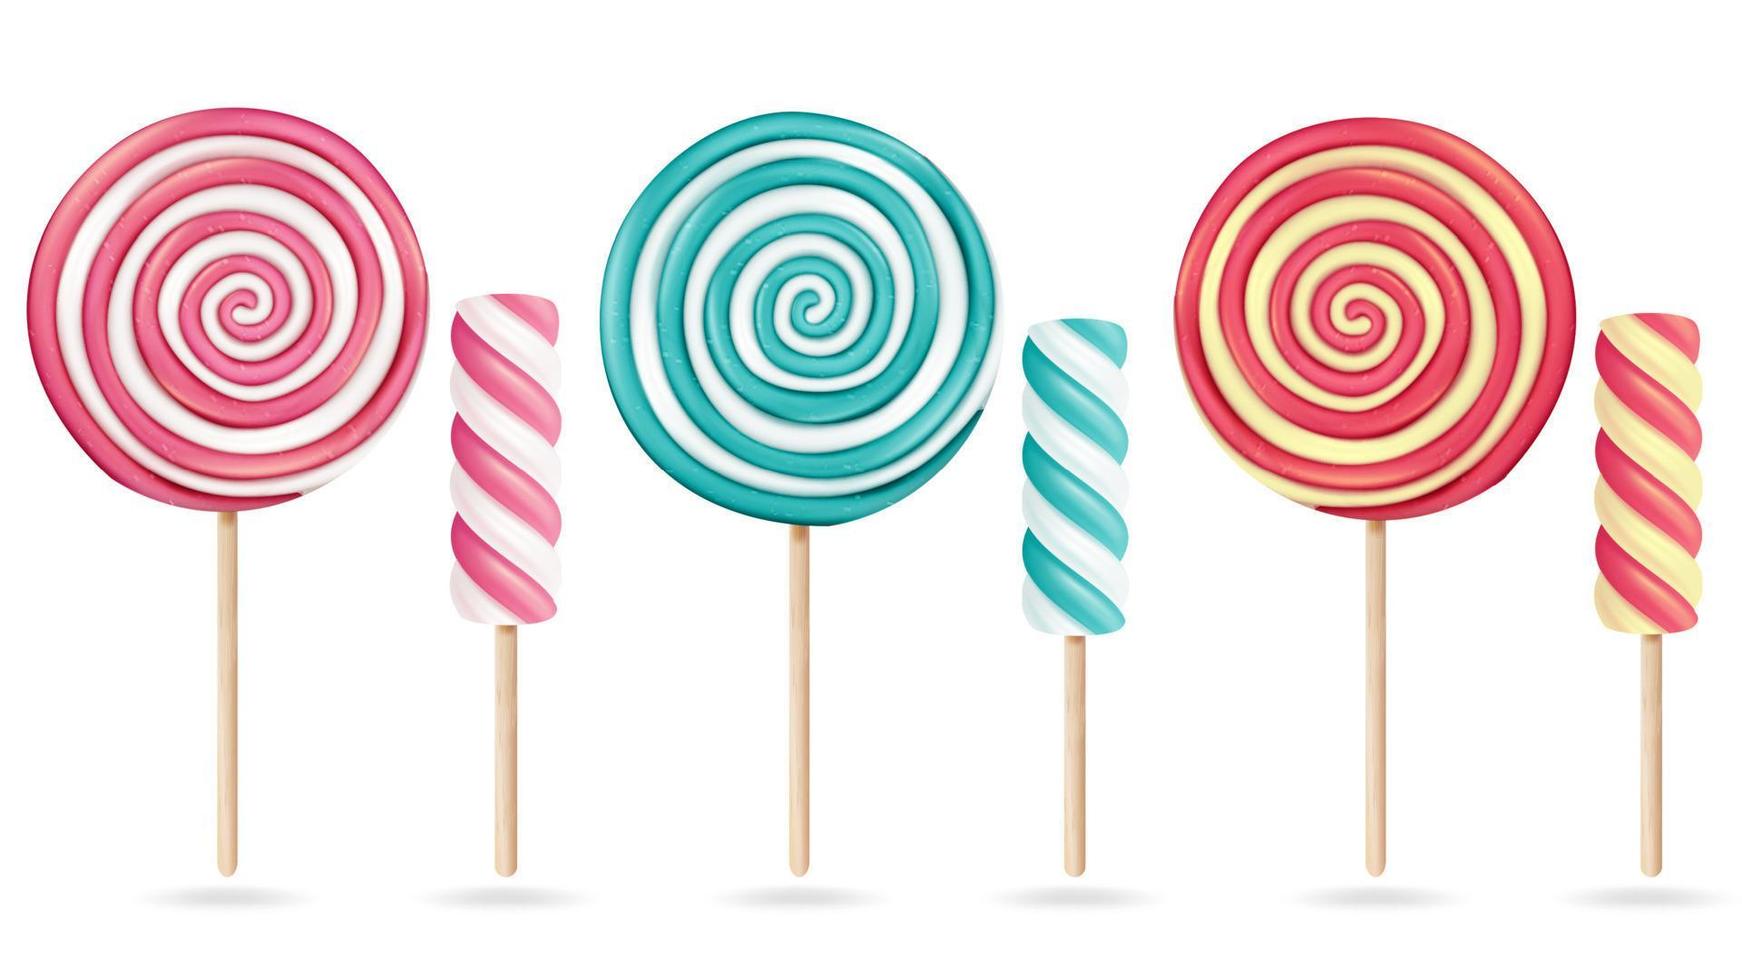 Round Pink Lollipop Set Vector. Cream Marshmallow On Stick. Sweet Realistic Candy Spiral Isolated Illustration vector